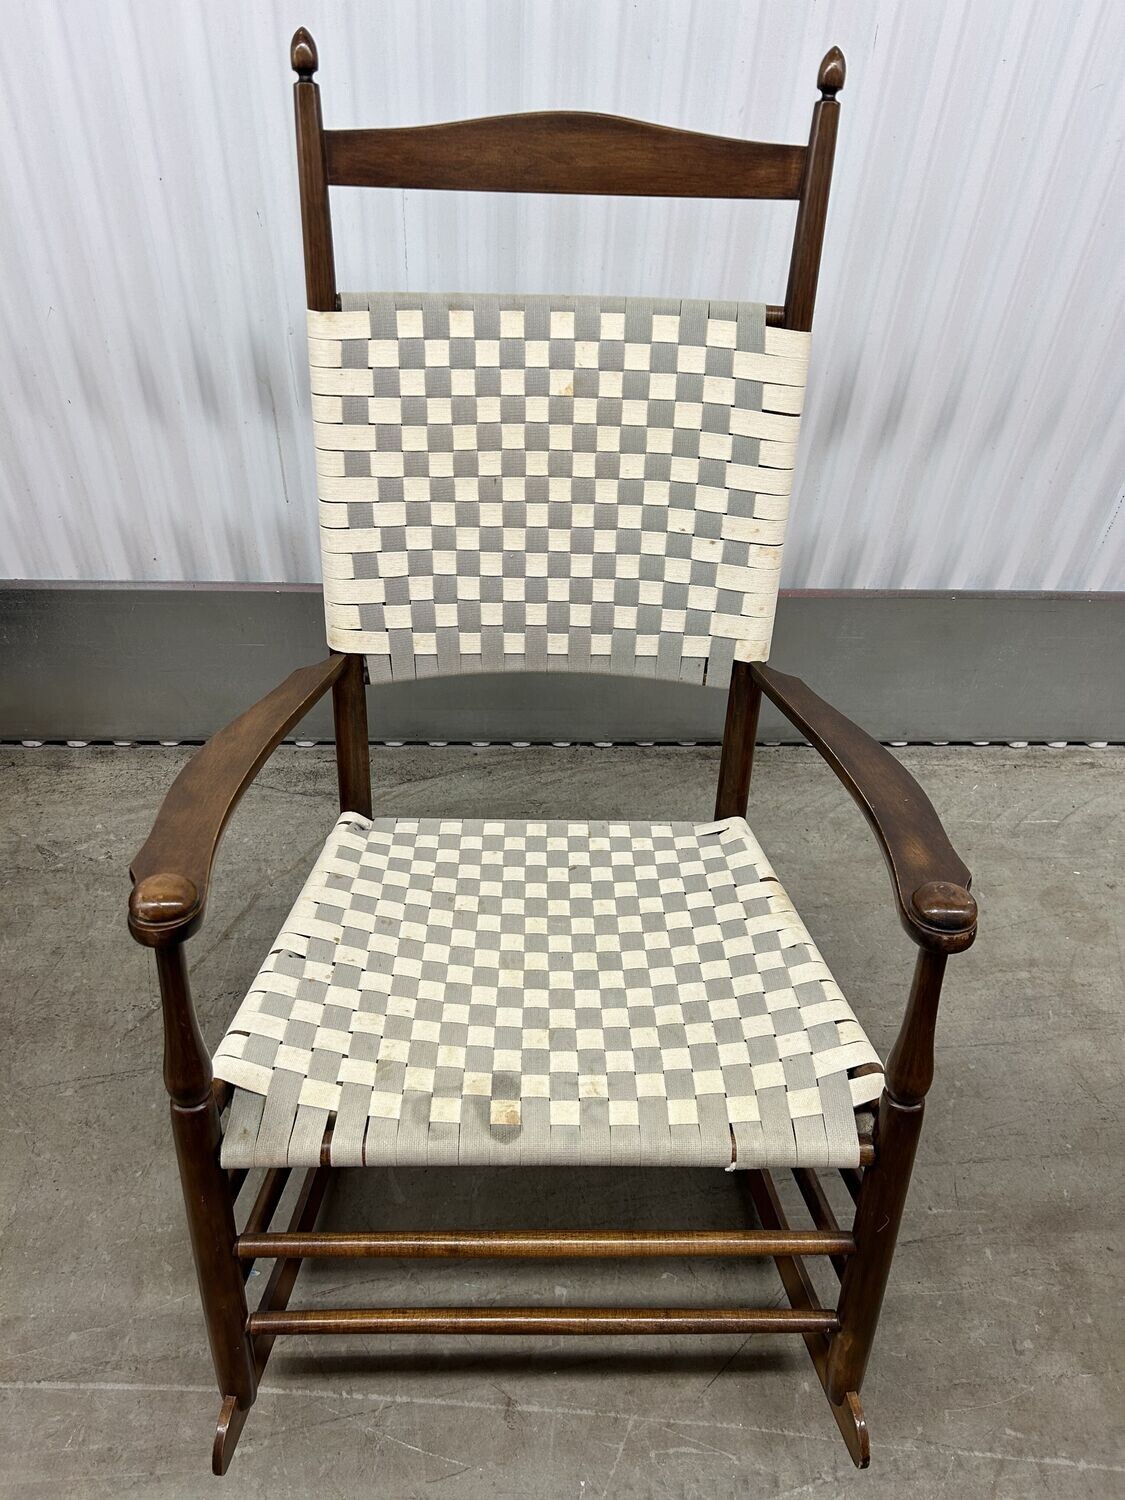 Vintage Shaker-style Rocker with Woven Seat #2009